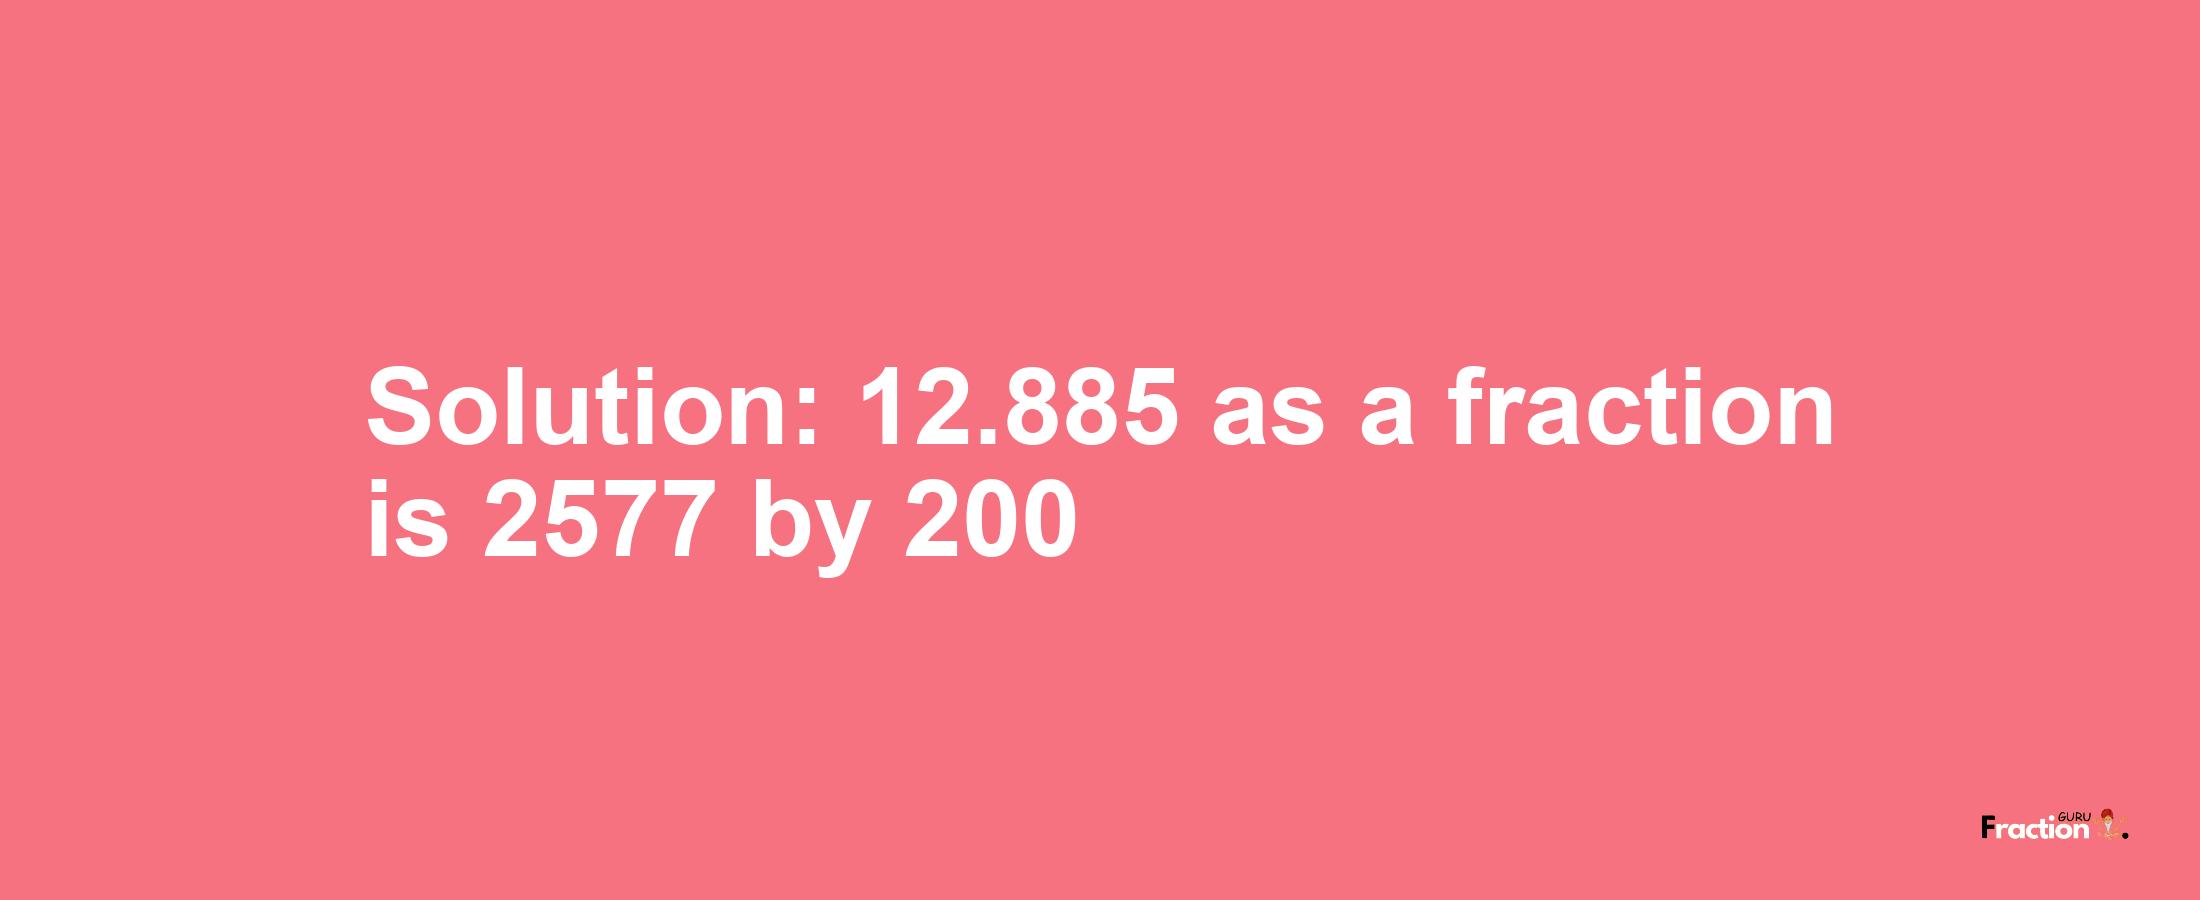 Solution:12.885 as a fraction is 2577/200